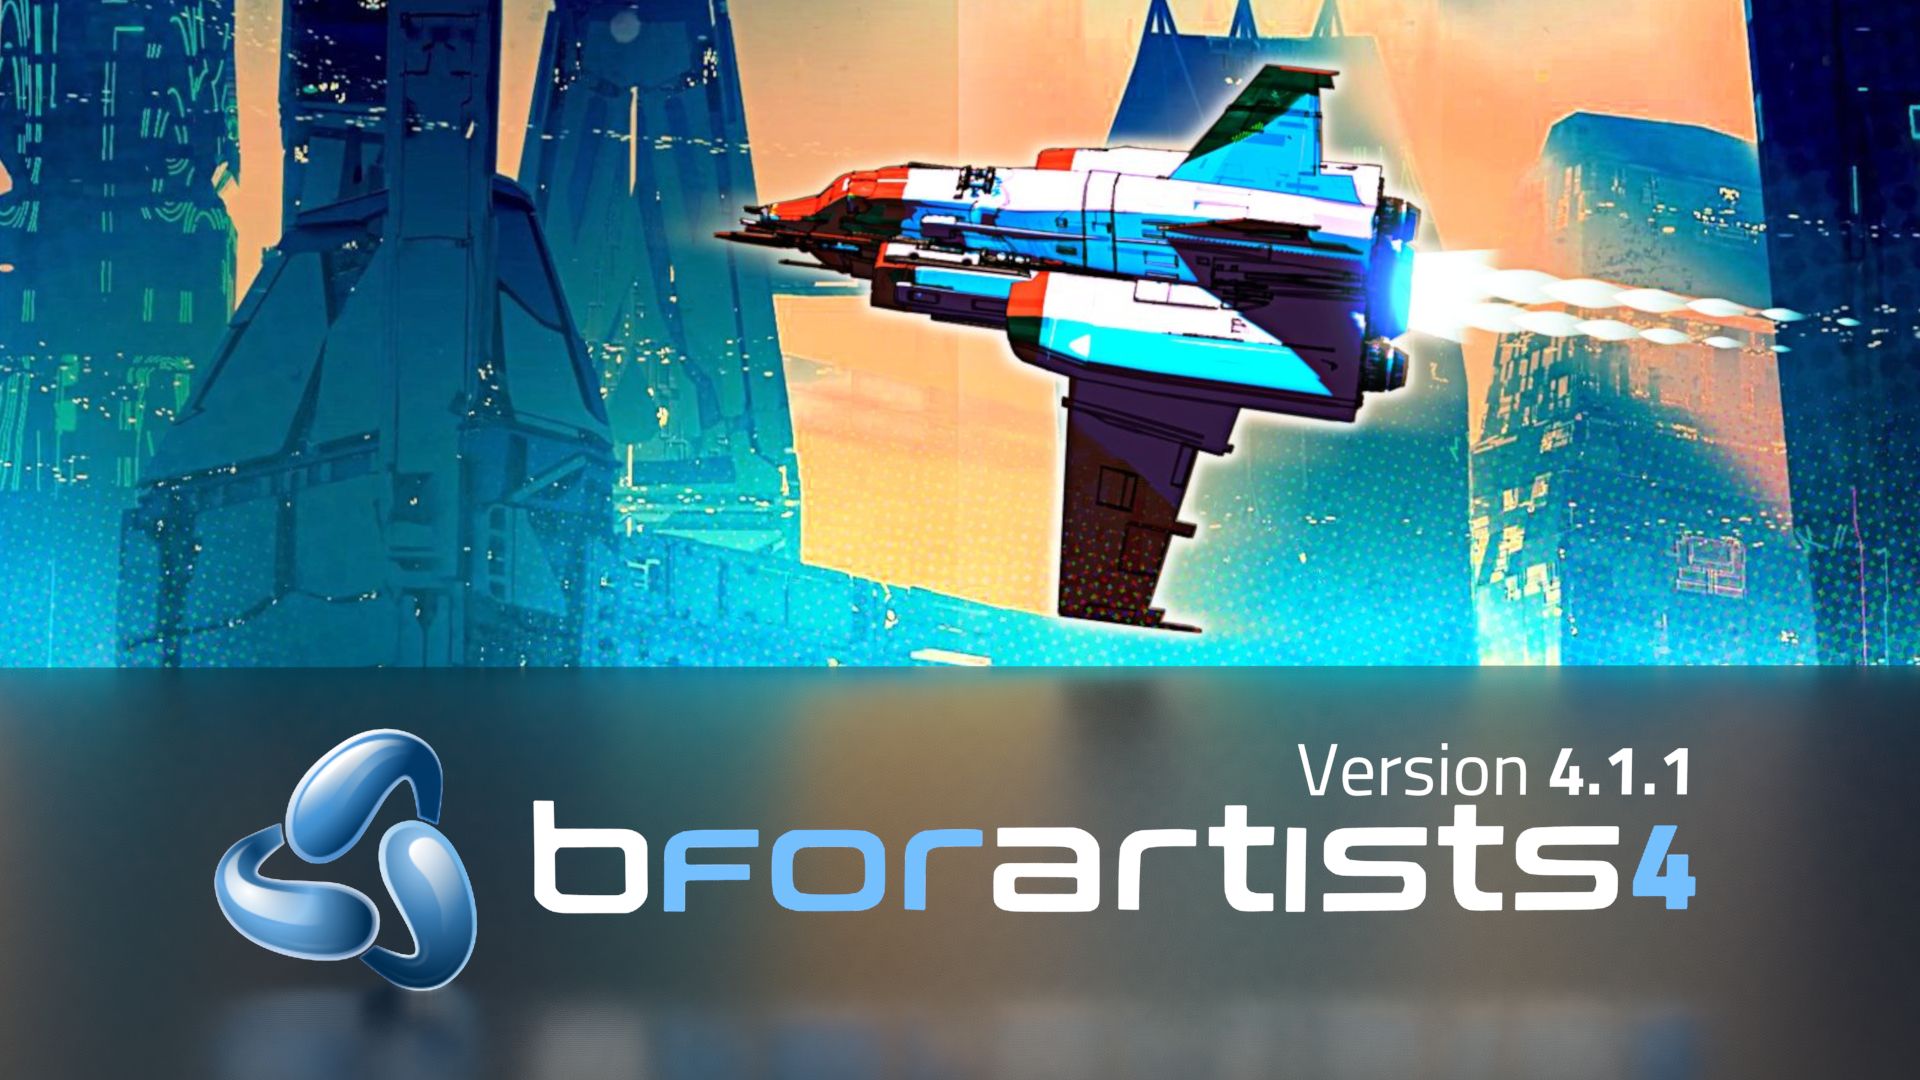 A splashscreen for Bforaritsts 4.1.1 with a non photoreal render of a red and white spaceshipt over a blue and yellow scifi cityscape.